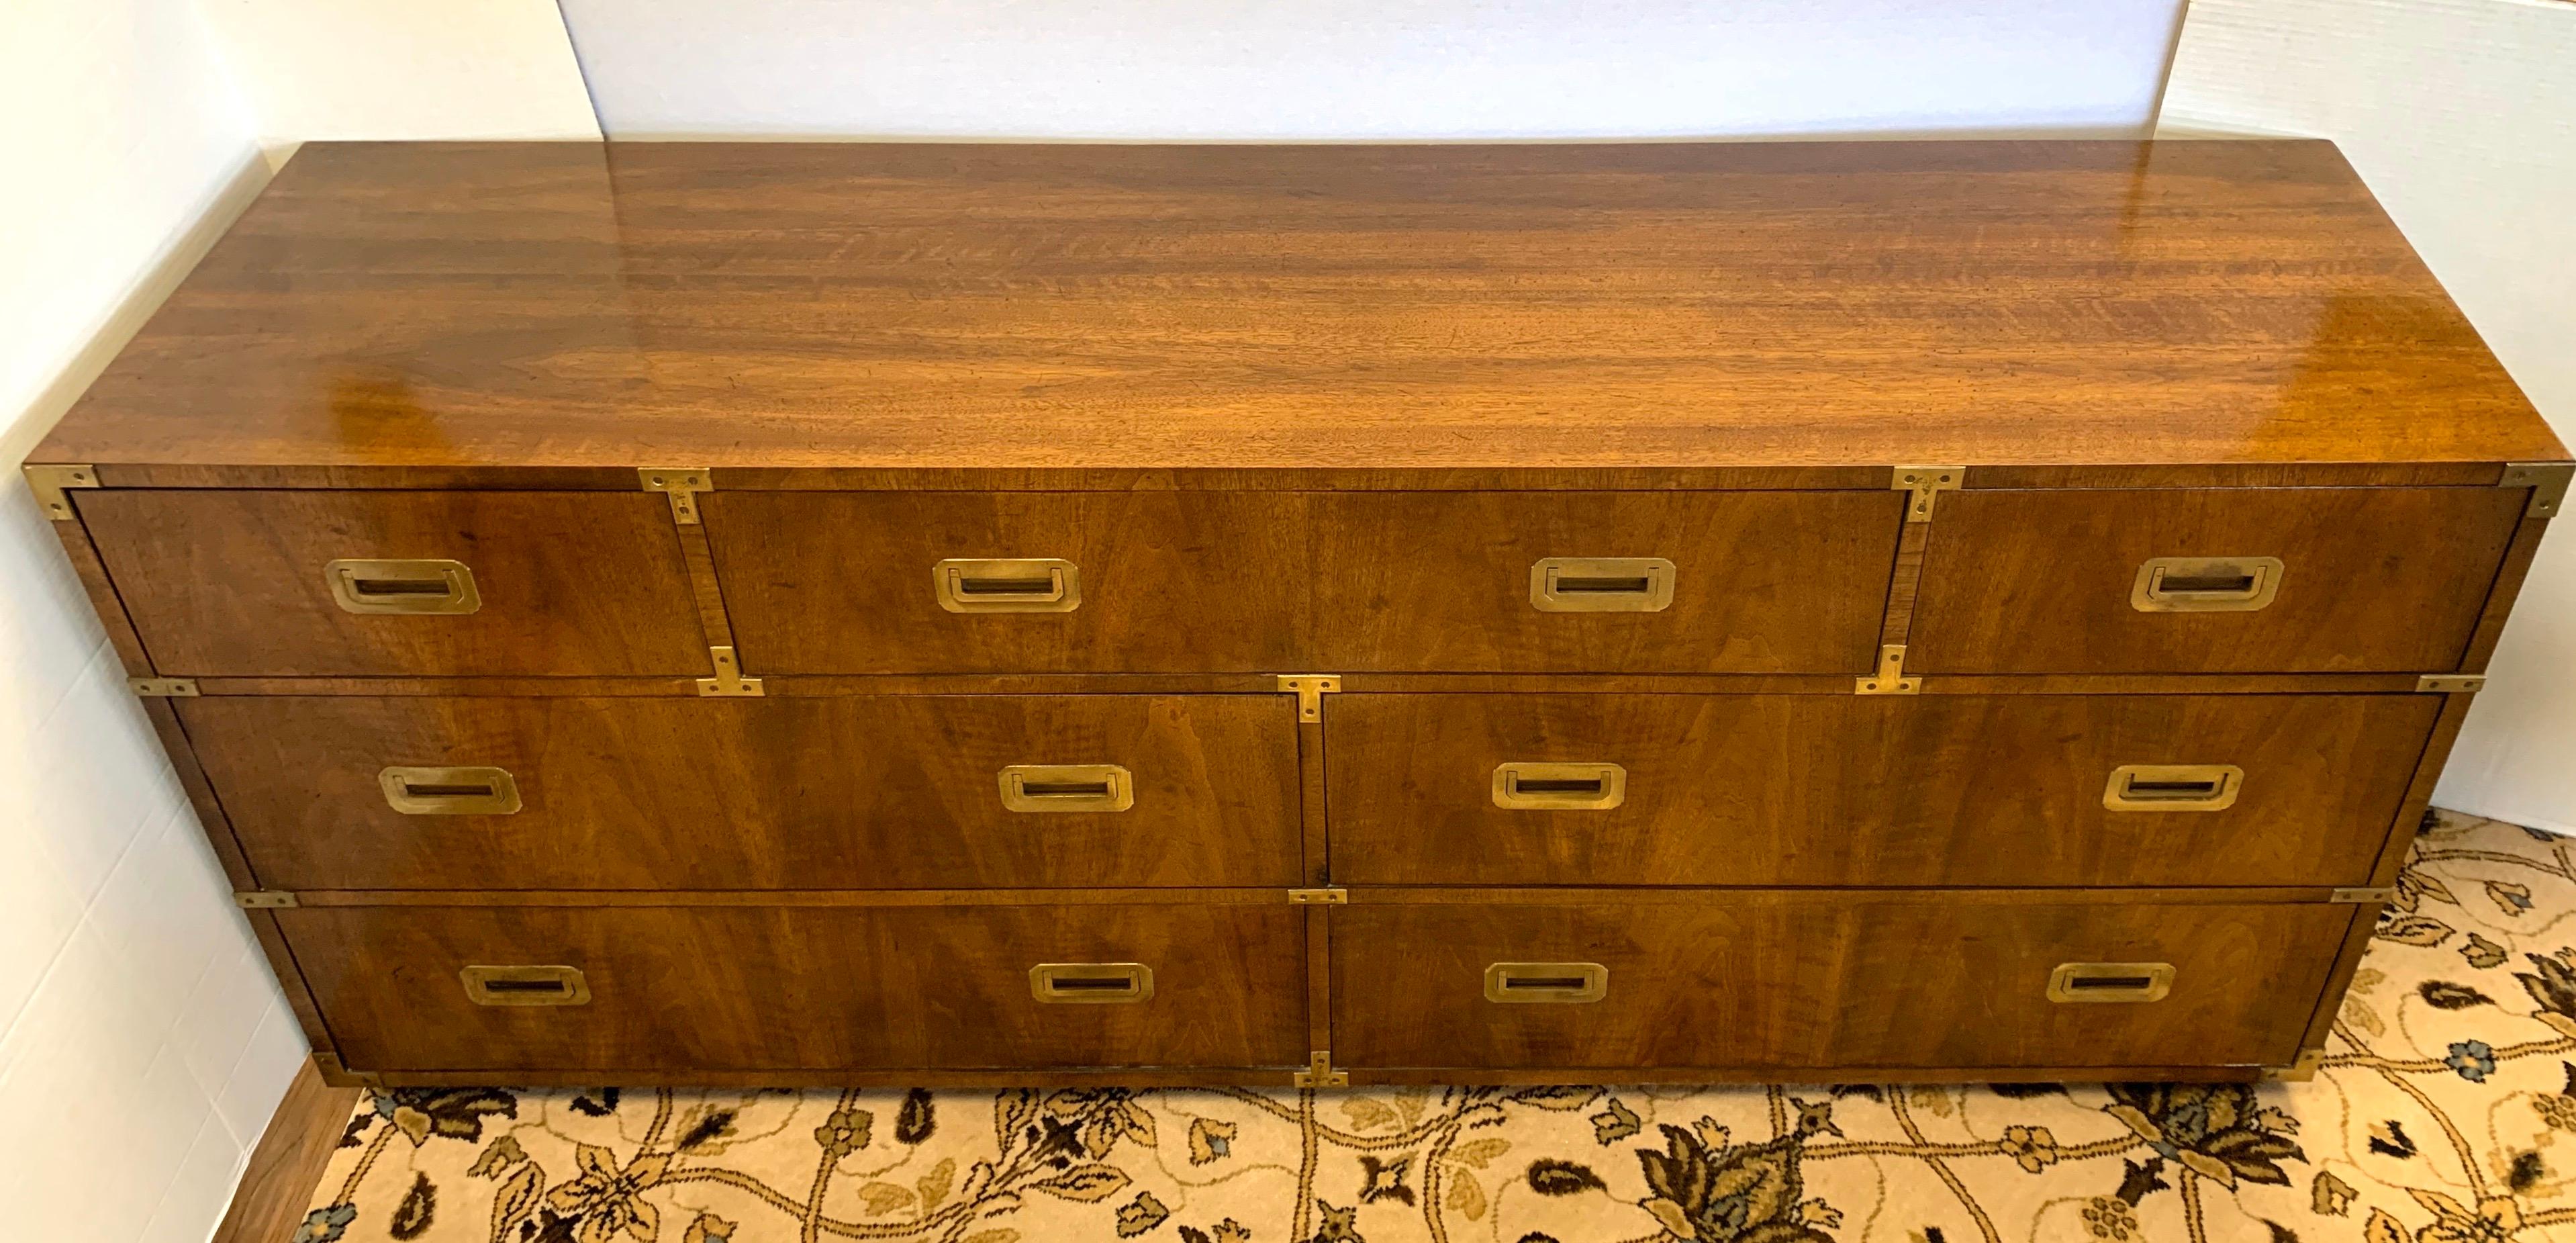 Immense Henredon Campaign dresser with seven spacious dovetailed drawers with original brass hardware. All Henredon hallmarks present. An iconic midcentury classic.